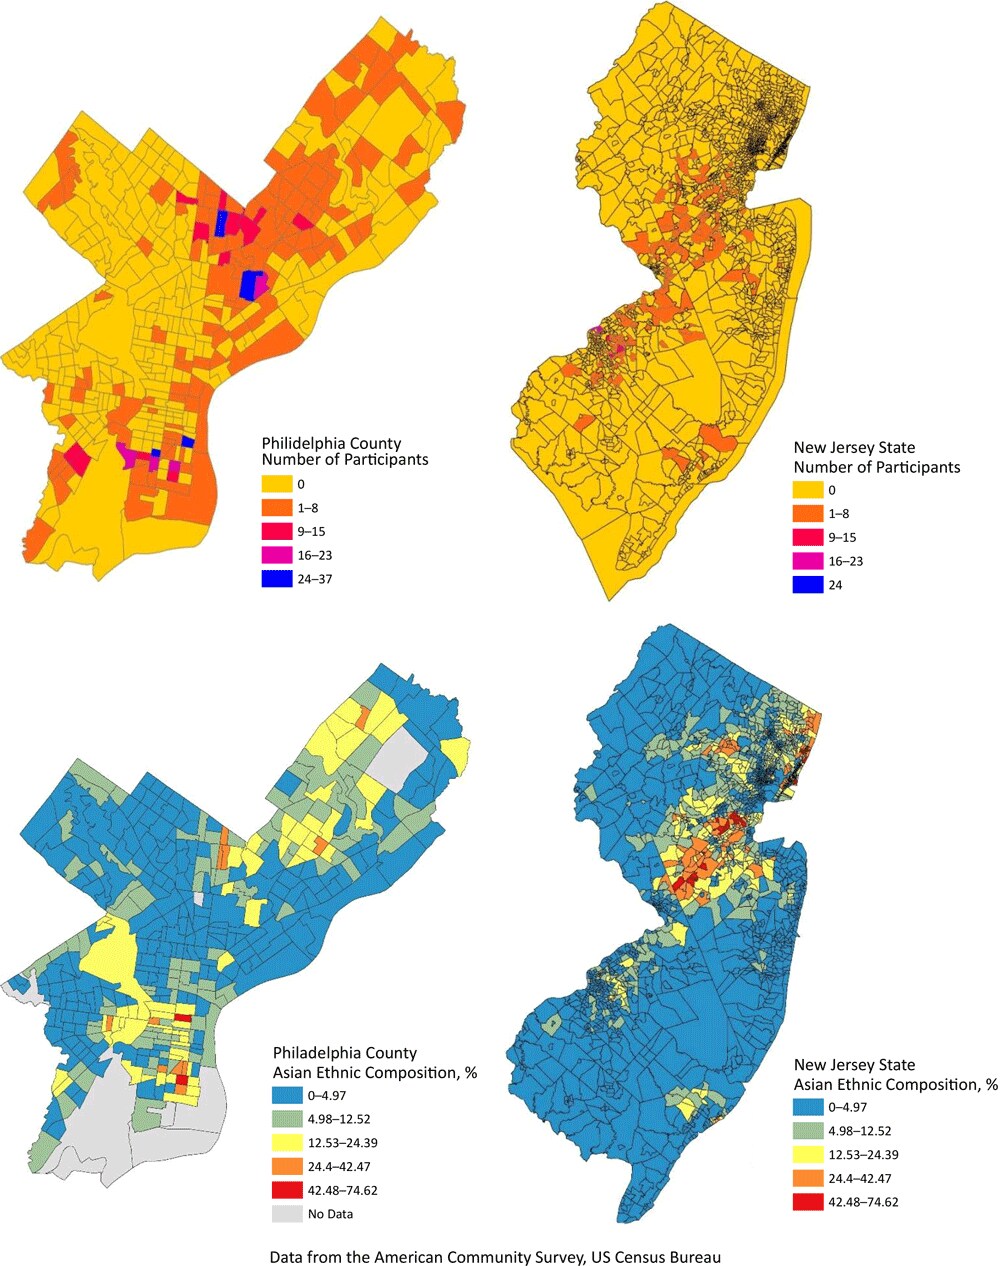 Asian ethnic composition in Philadelphia County and New Jersey census tracts. Data from the American Community Survey, US Census Bureau. 